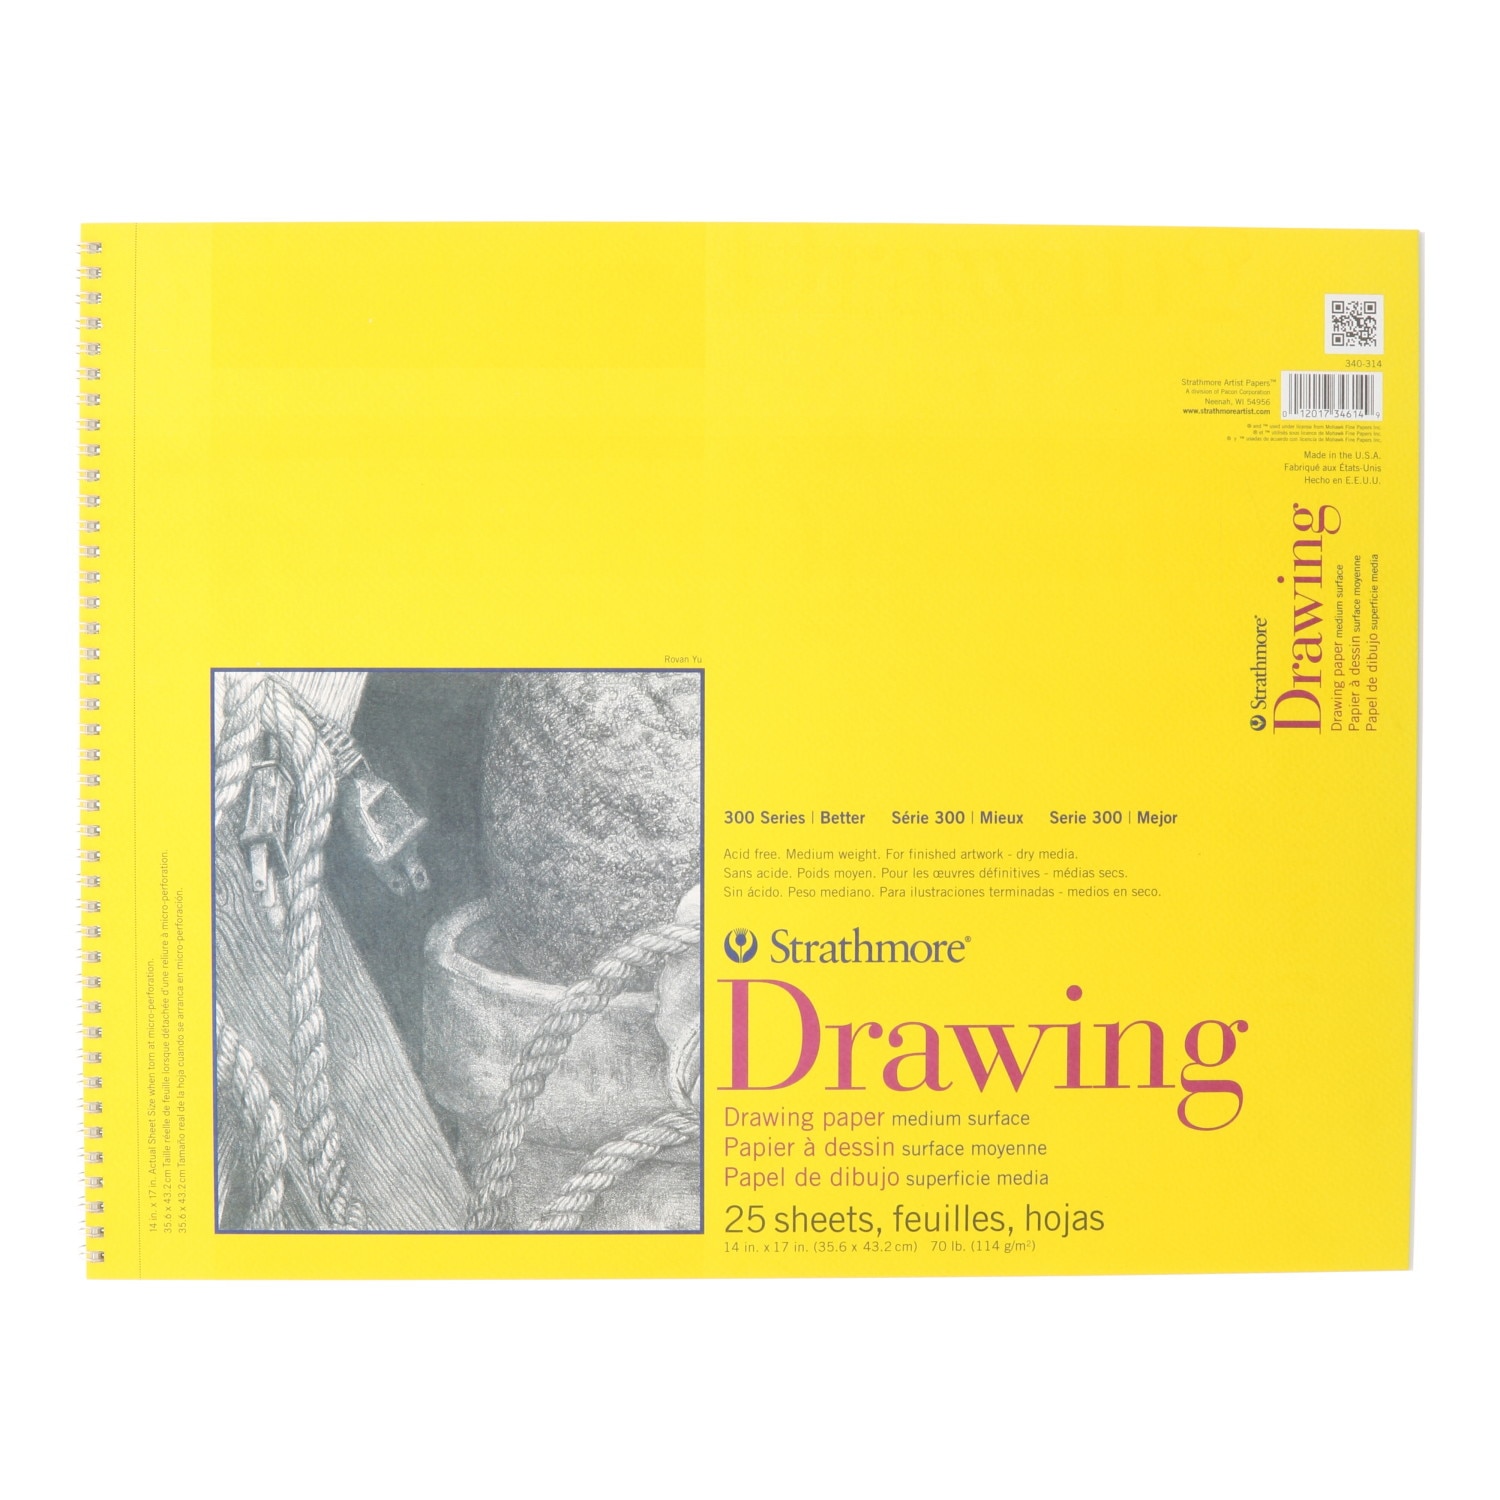 Strathmore Drawing Paper Pad, 300 Series, 25 Sheets, 14" x 17", Spiral Bound